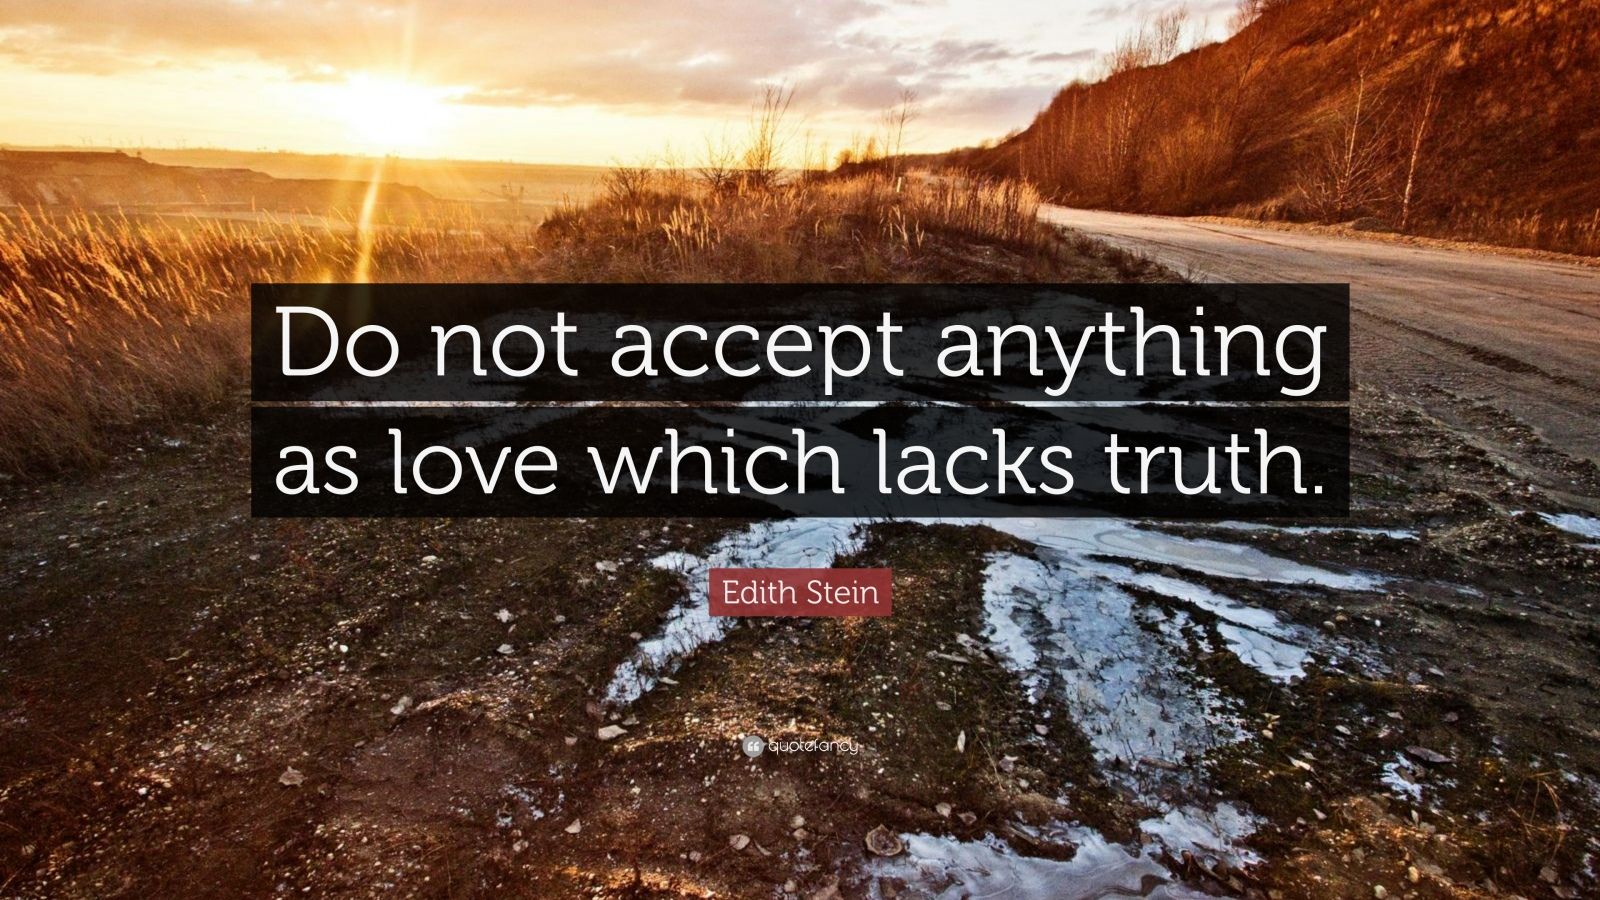 Edith Stein Quote: “Do not accept anything as love which lacks truth ...